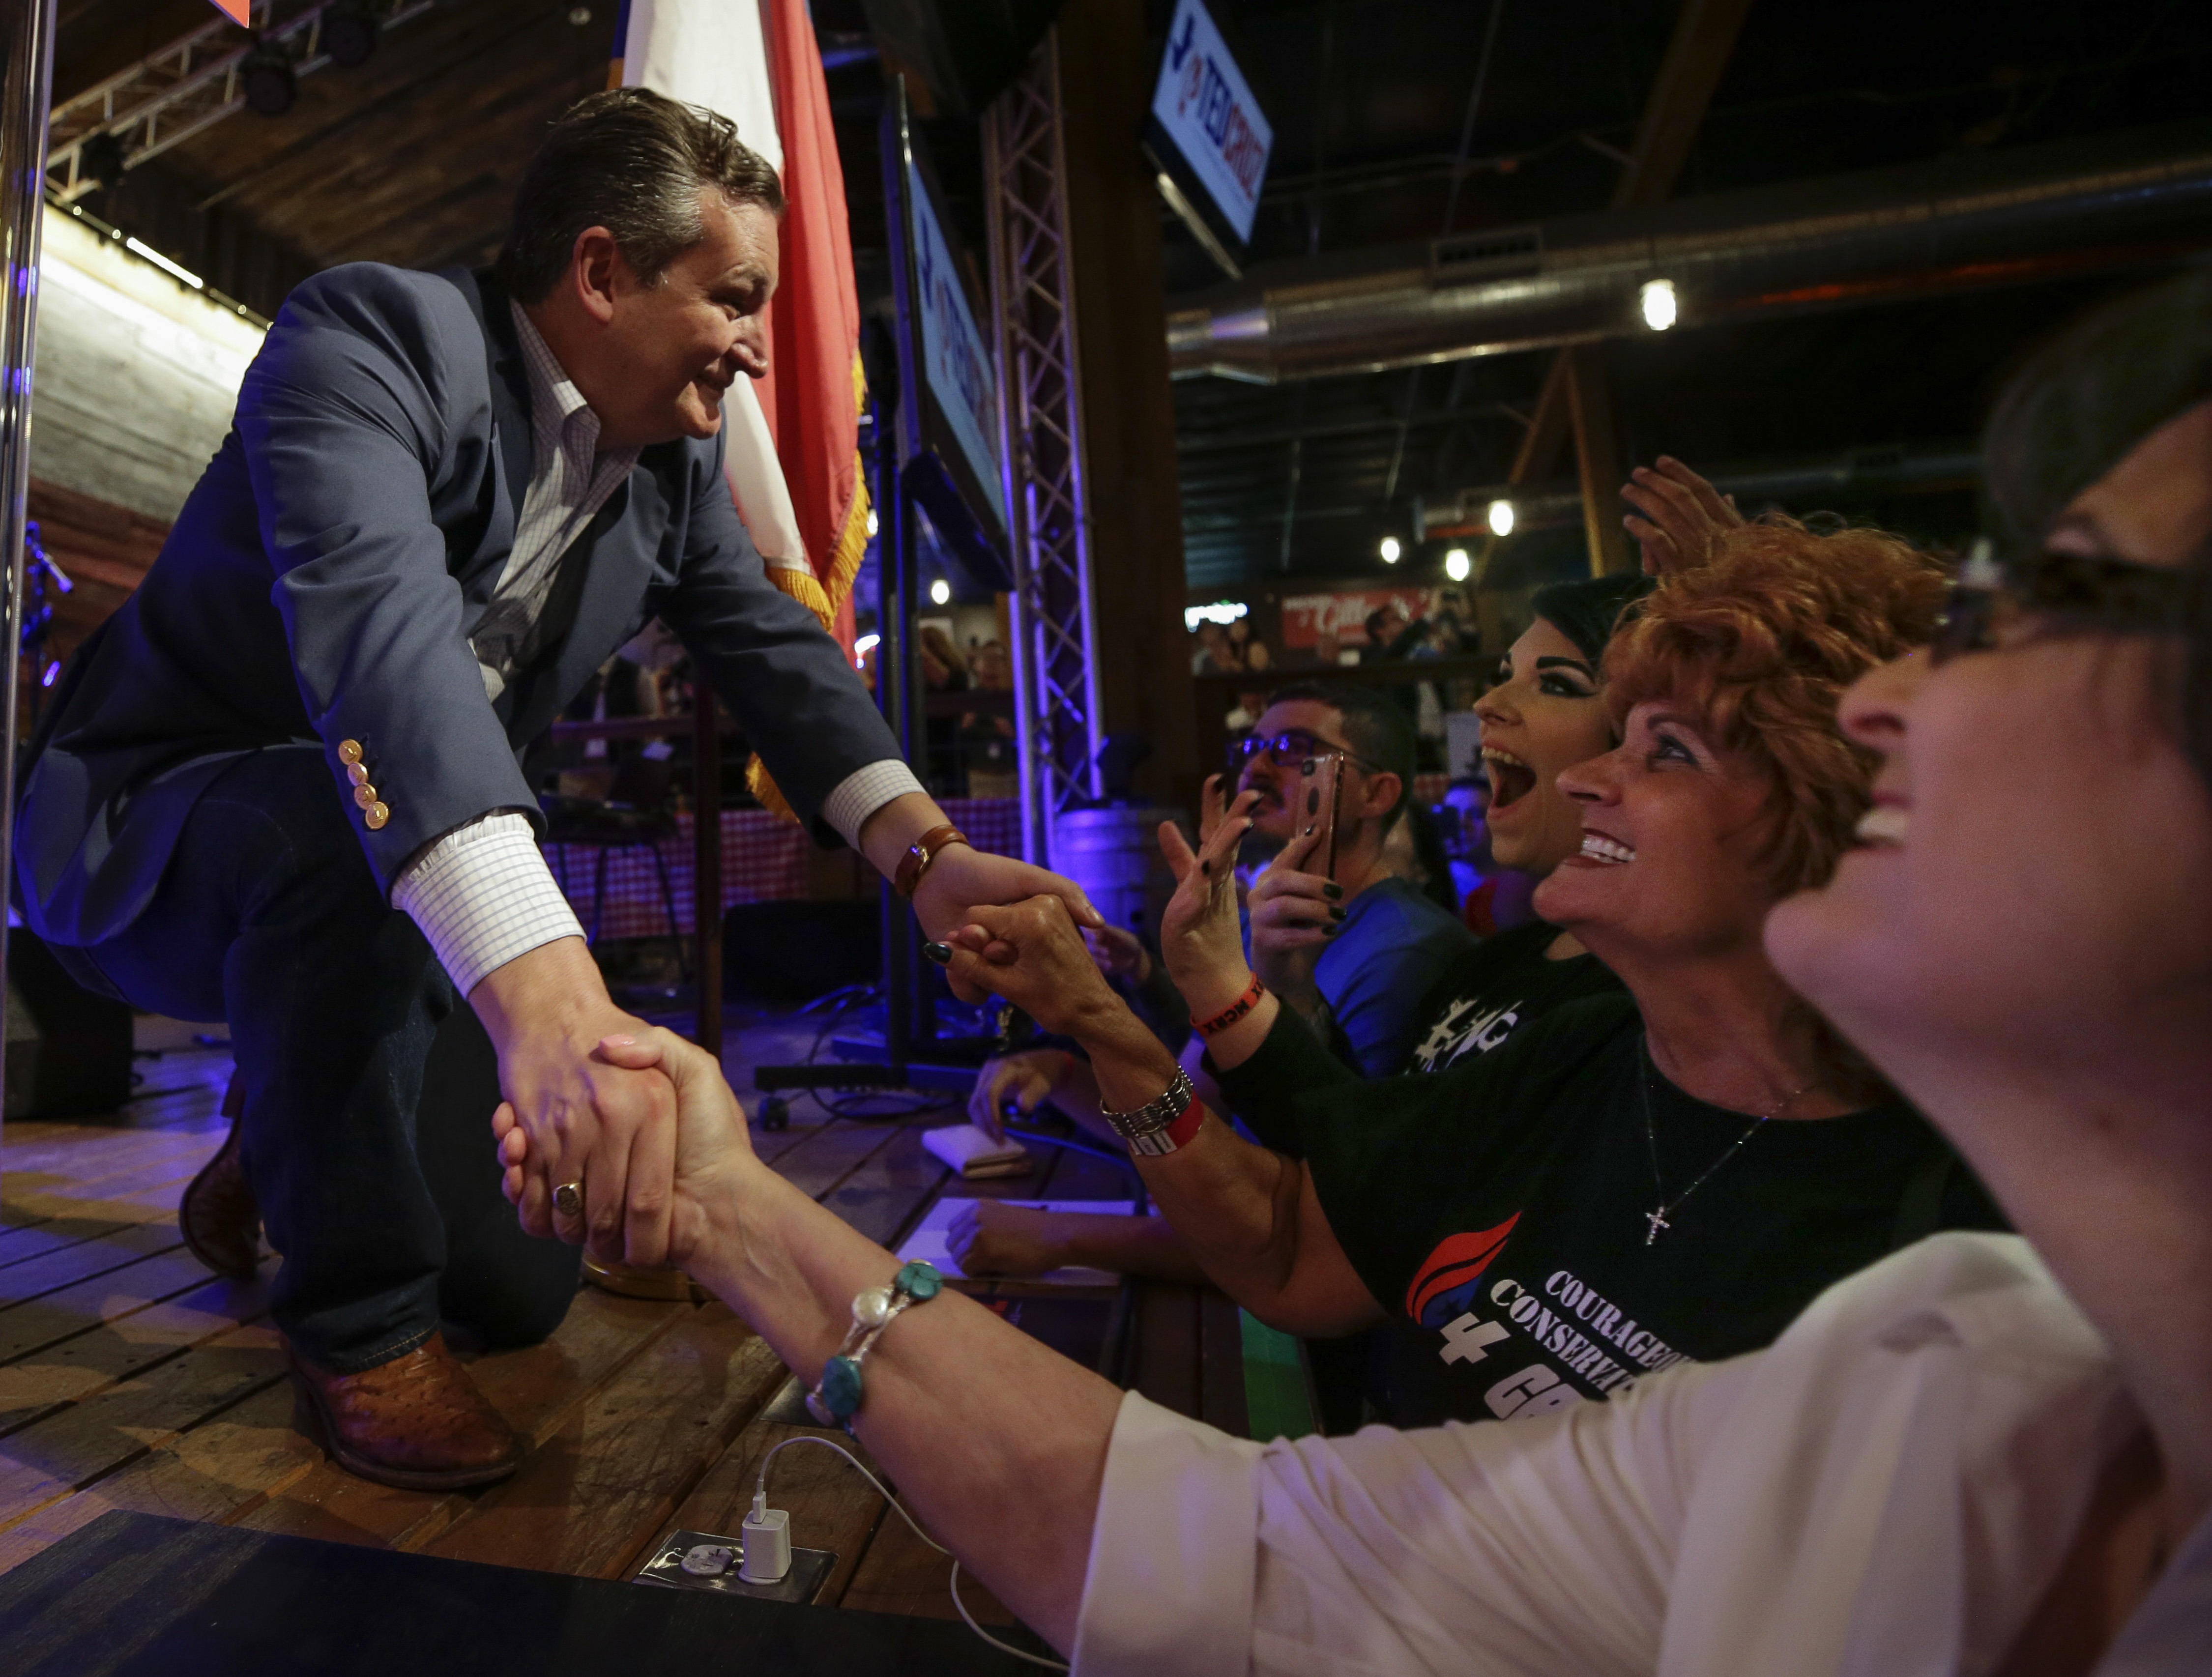 Sen. Ted Cruz shakes hands with supporters during a rally to launch his re-election campaign at the Redneck Country Club on April 2, 2018 in Stafford, Texas. (Erich Schlegel/Getty Images)